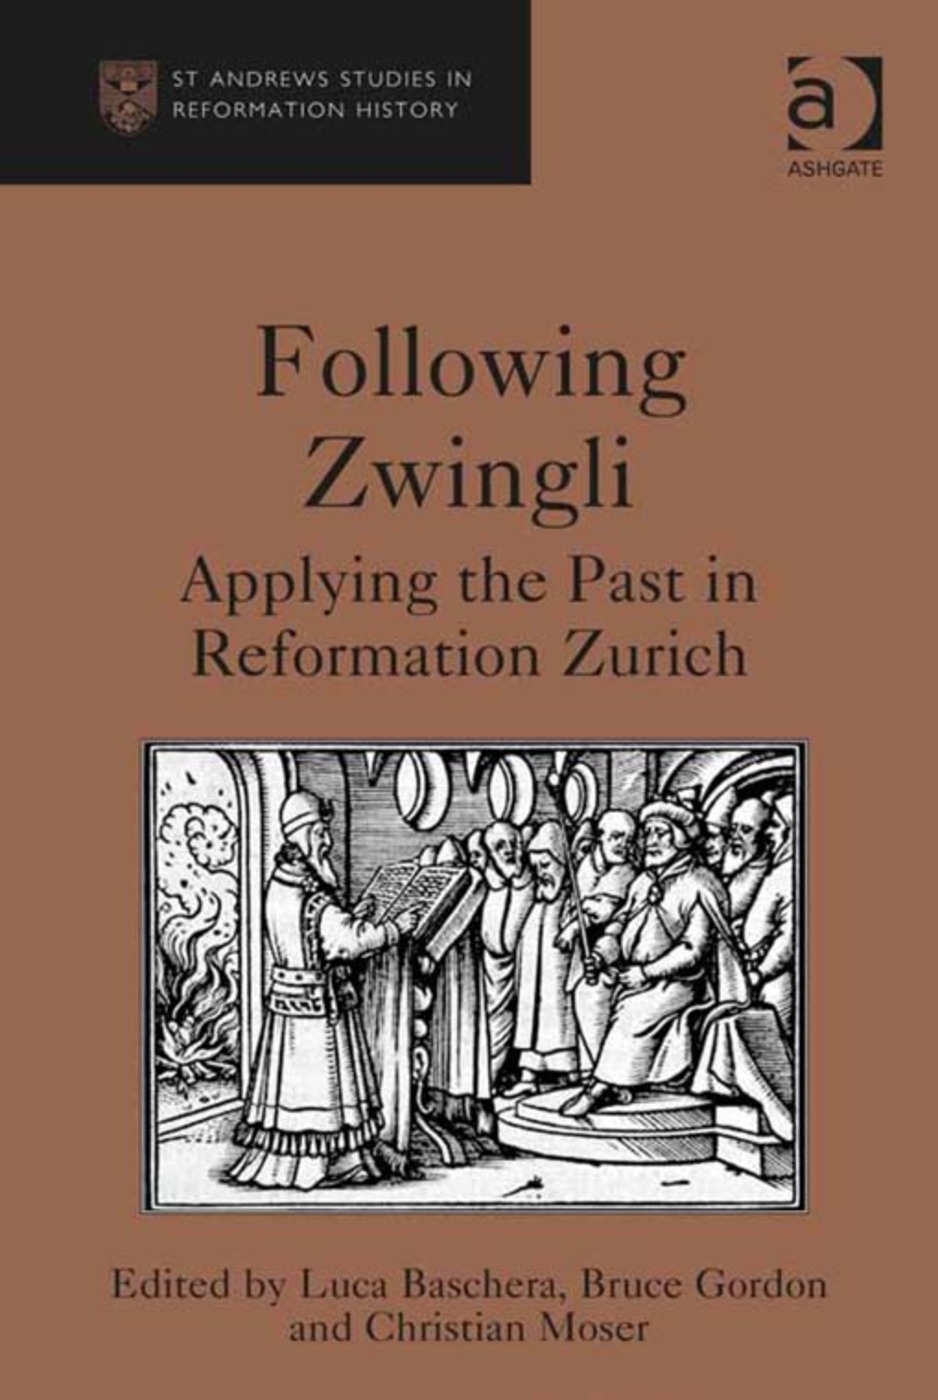 Following Zwingli: Applying the Past in Reformation Zurich